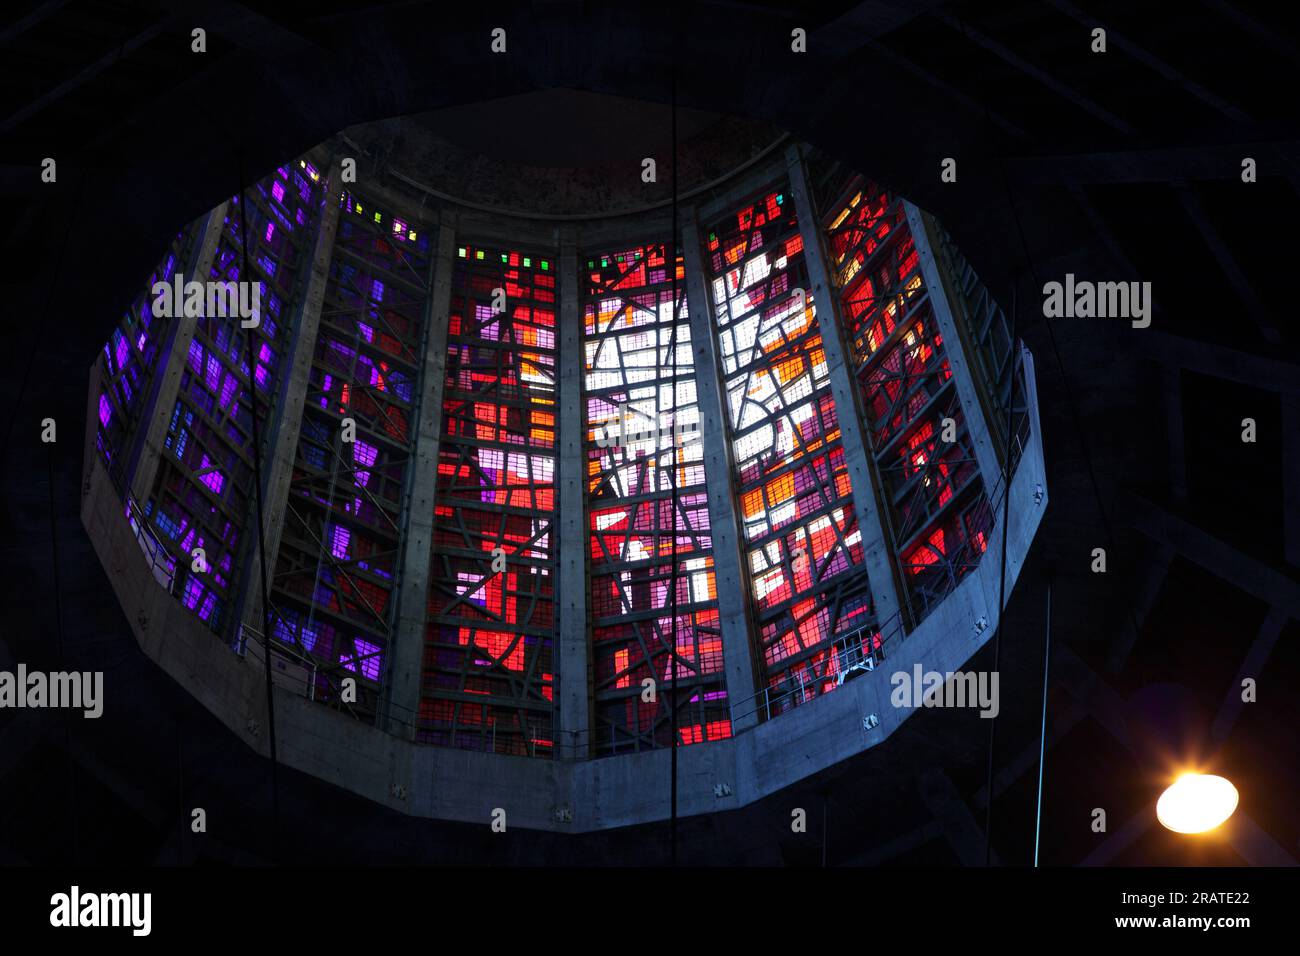 Liverpool Metropolitan Cathedral's interior, stained glass and circular nave. Stock Photo